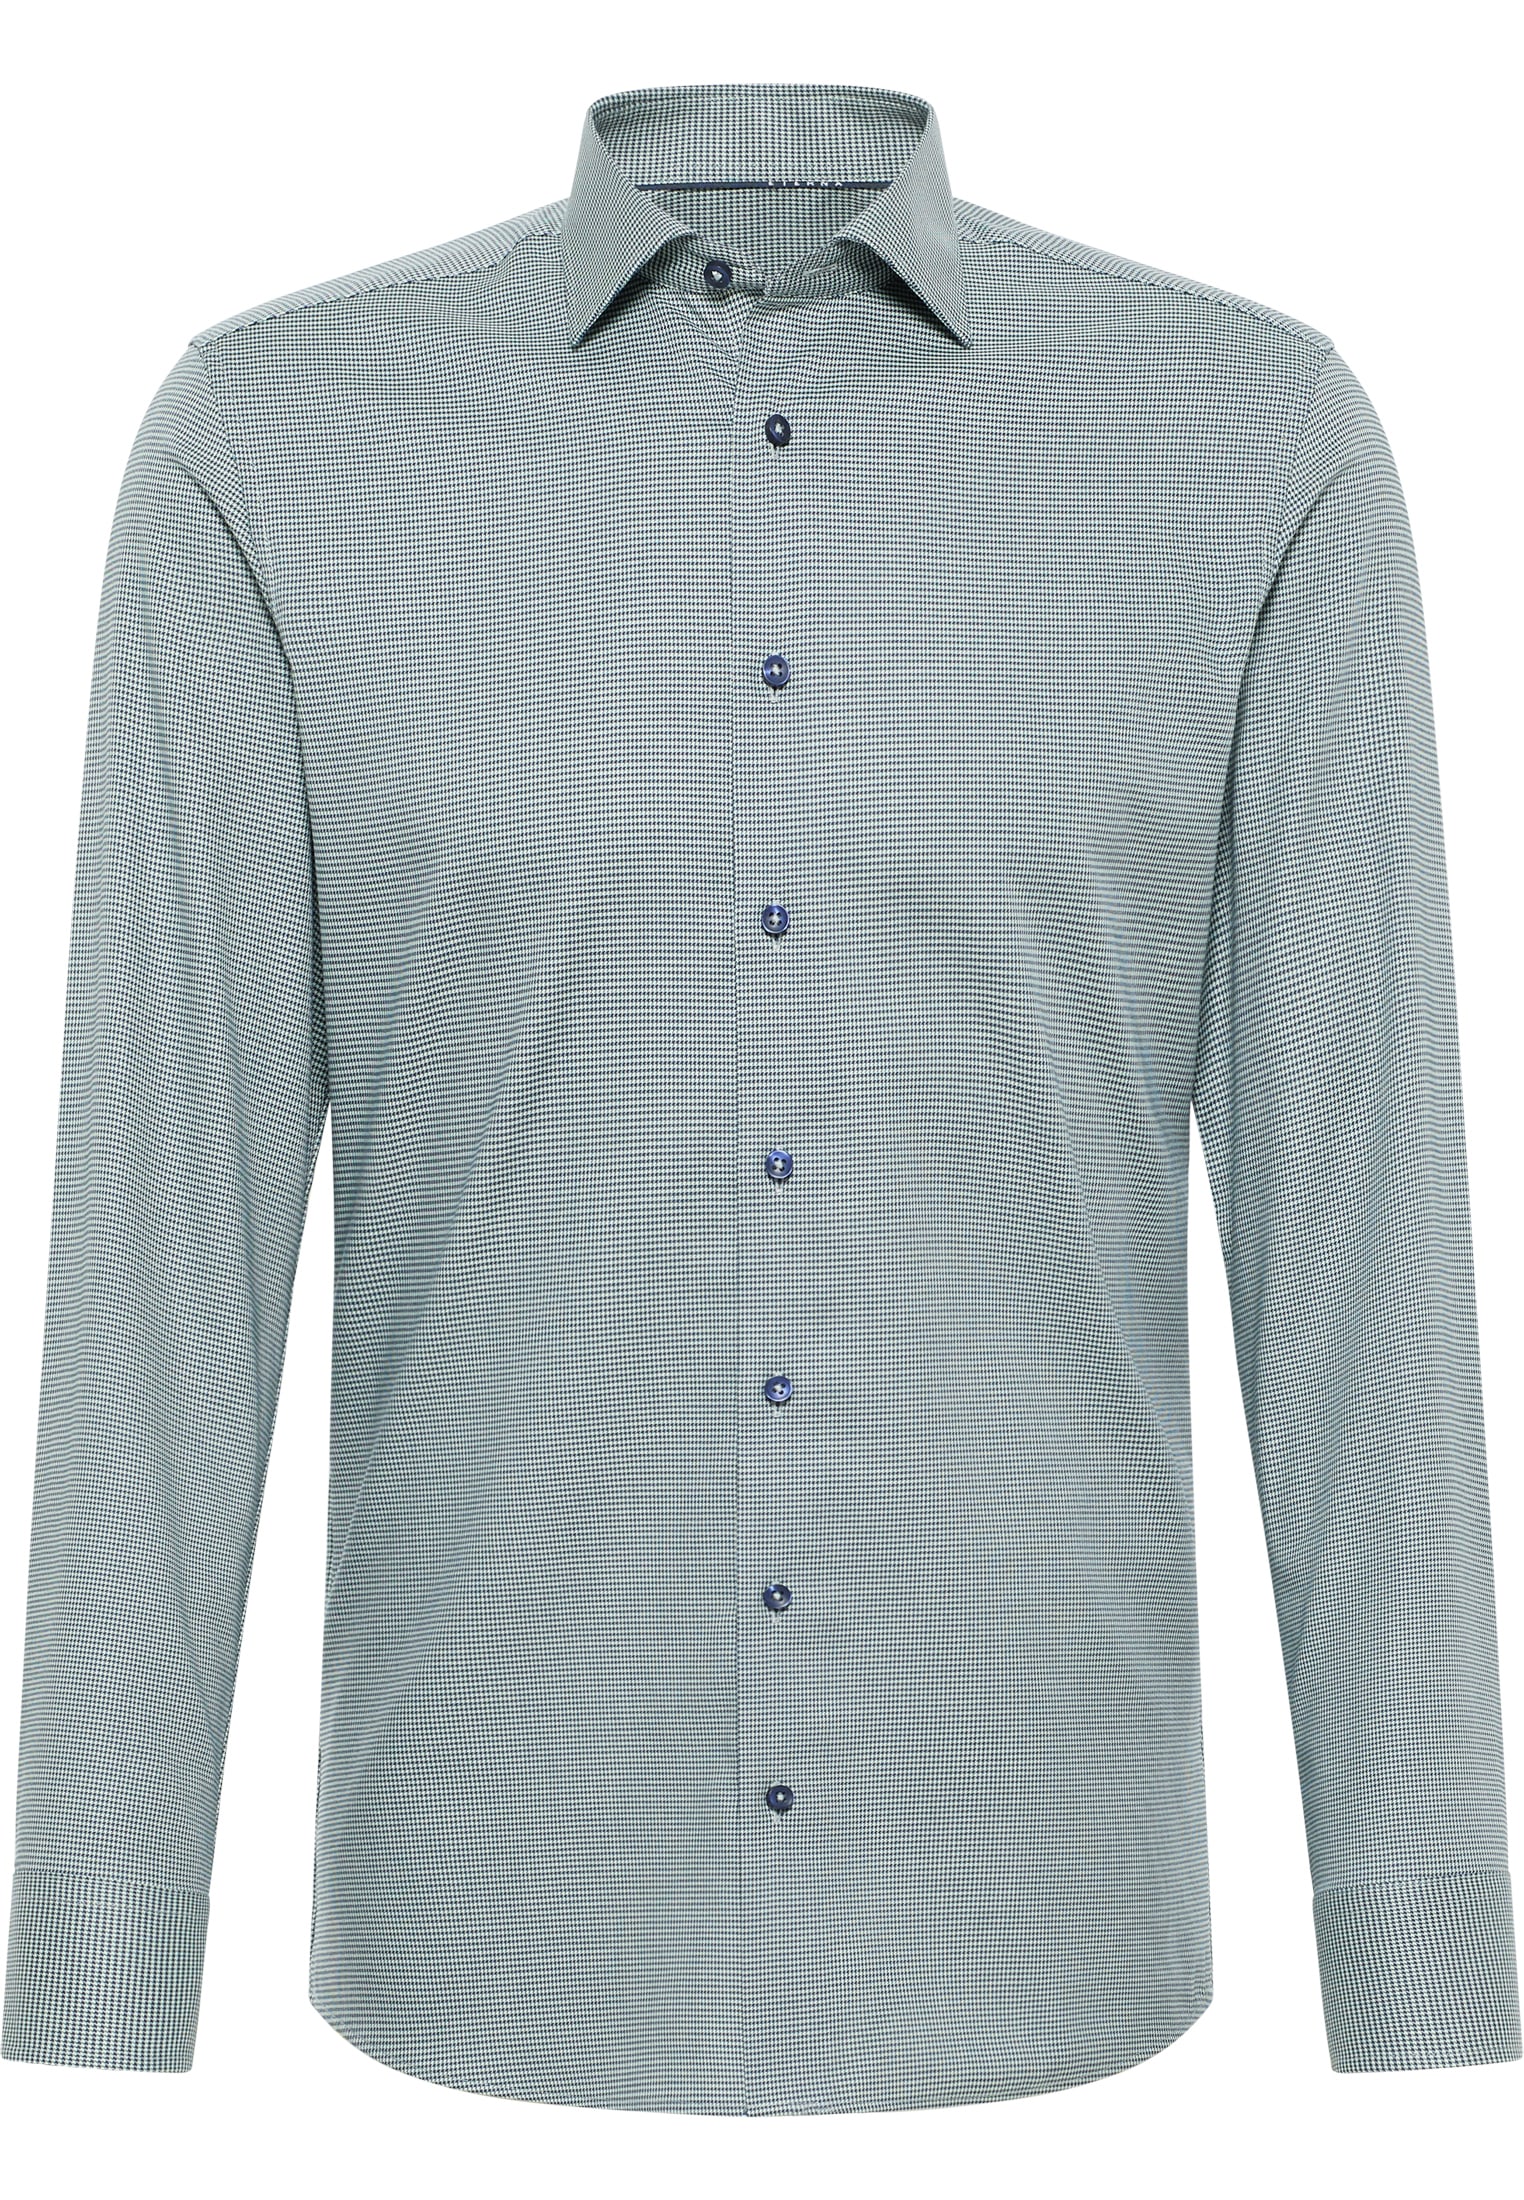 SLIM FIT Shirt in sage green checkered